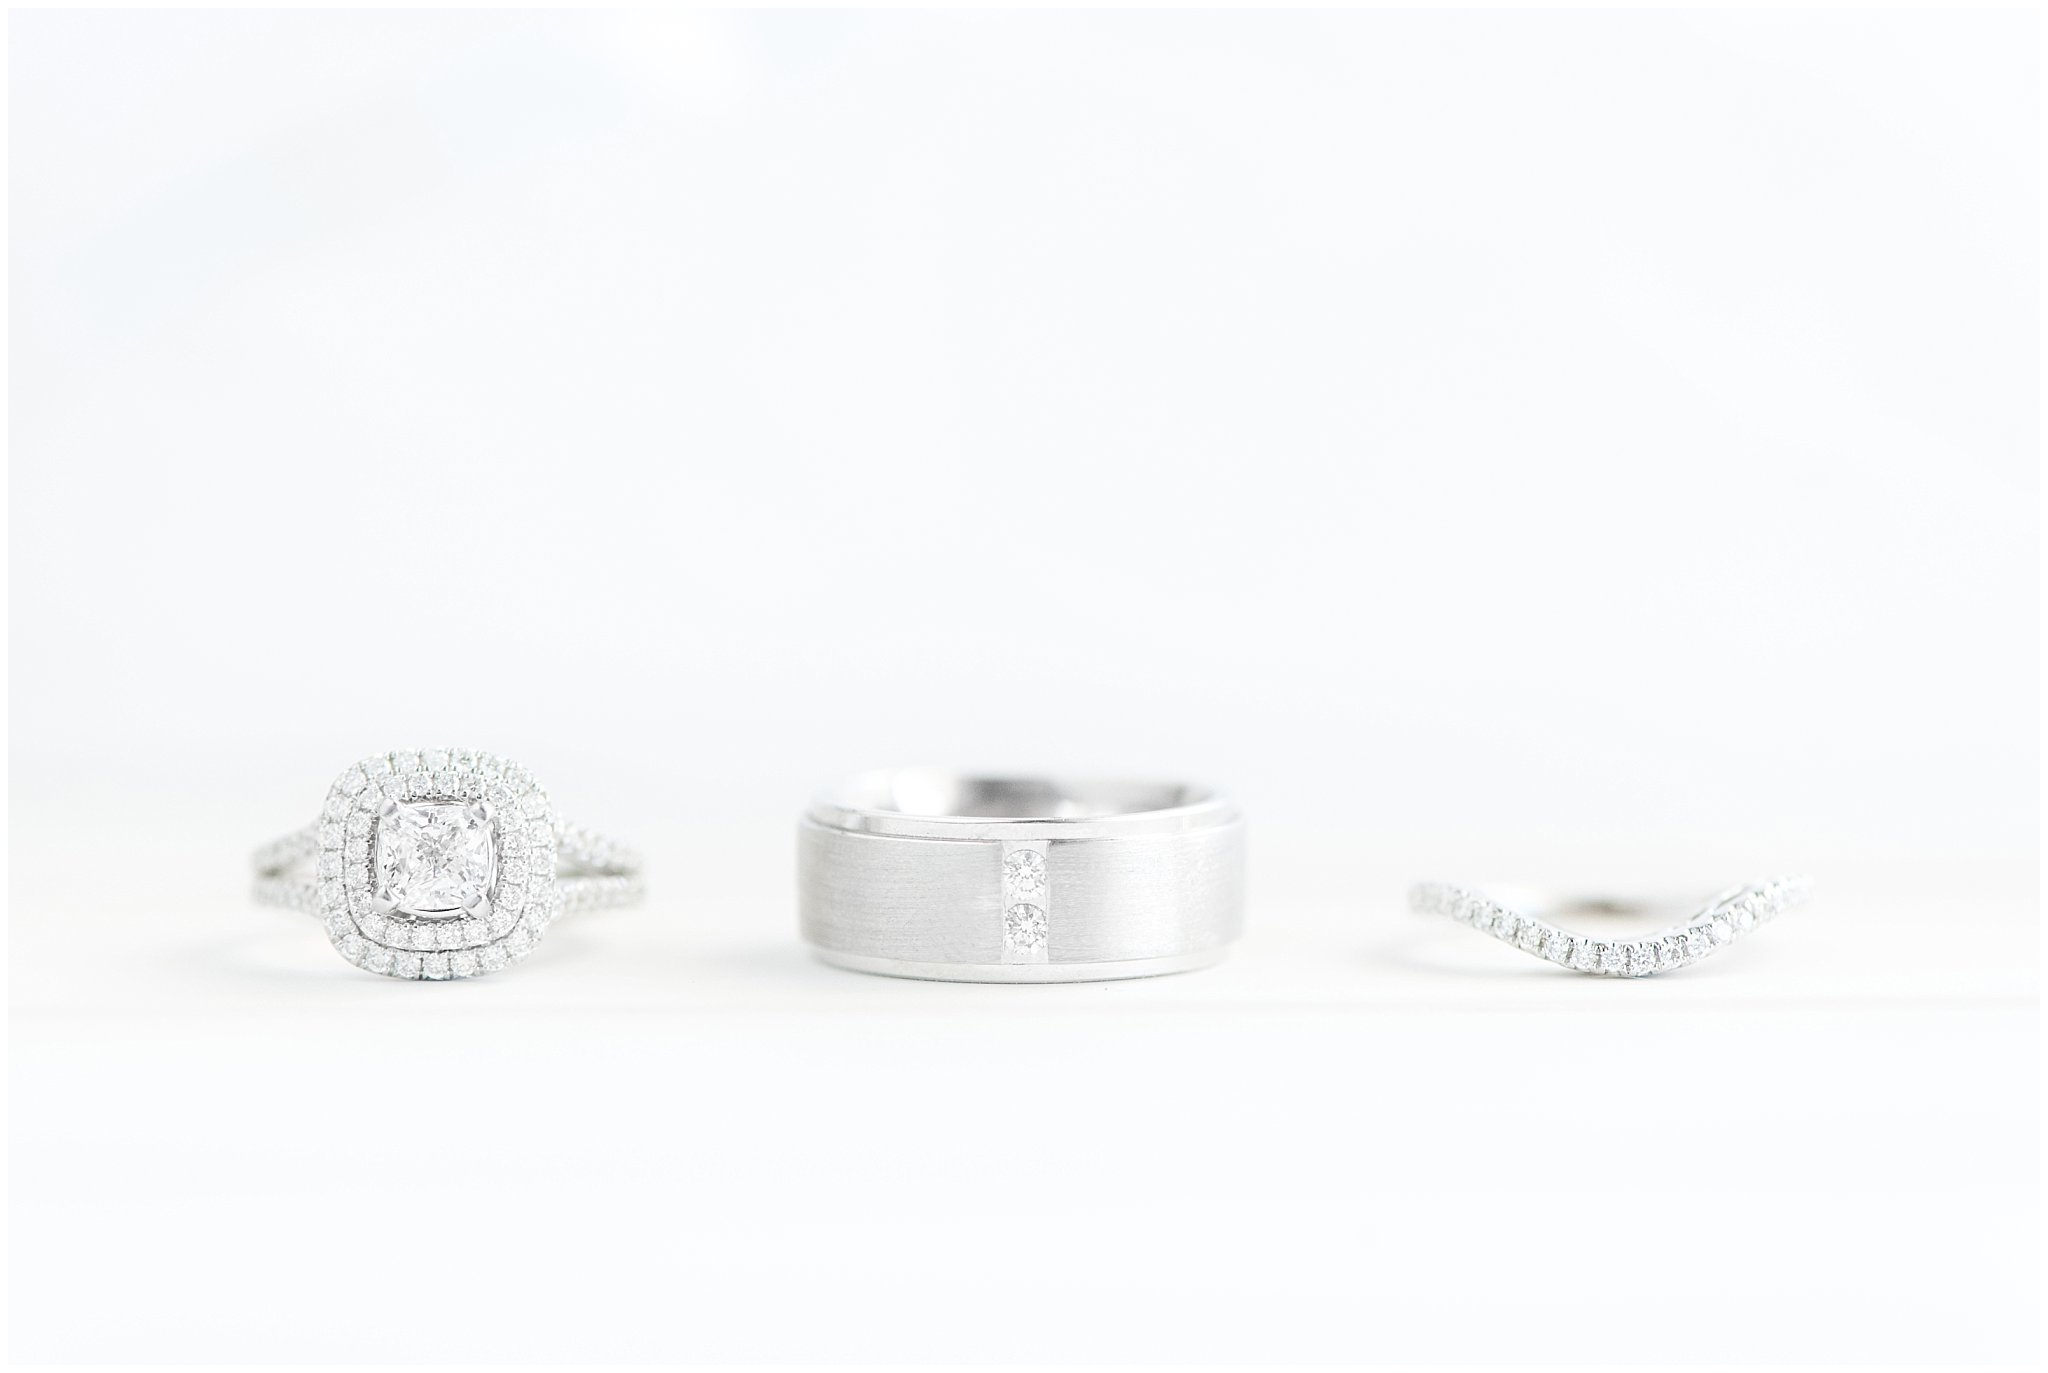 Wedding ring detail shot on white background | Log Haven Summer Mountain Wedding | Jessie and Dallin Photography